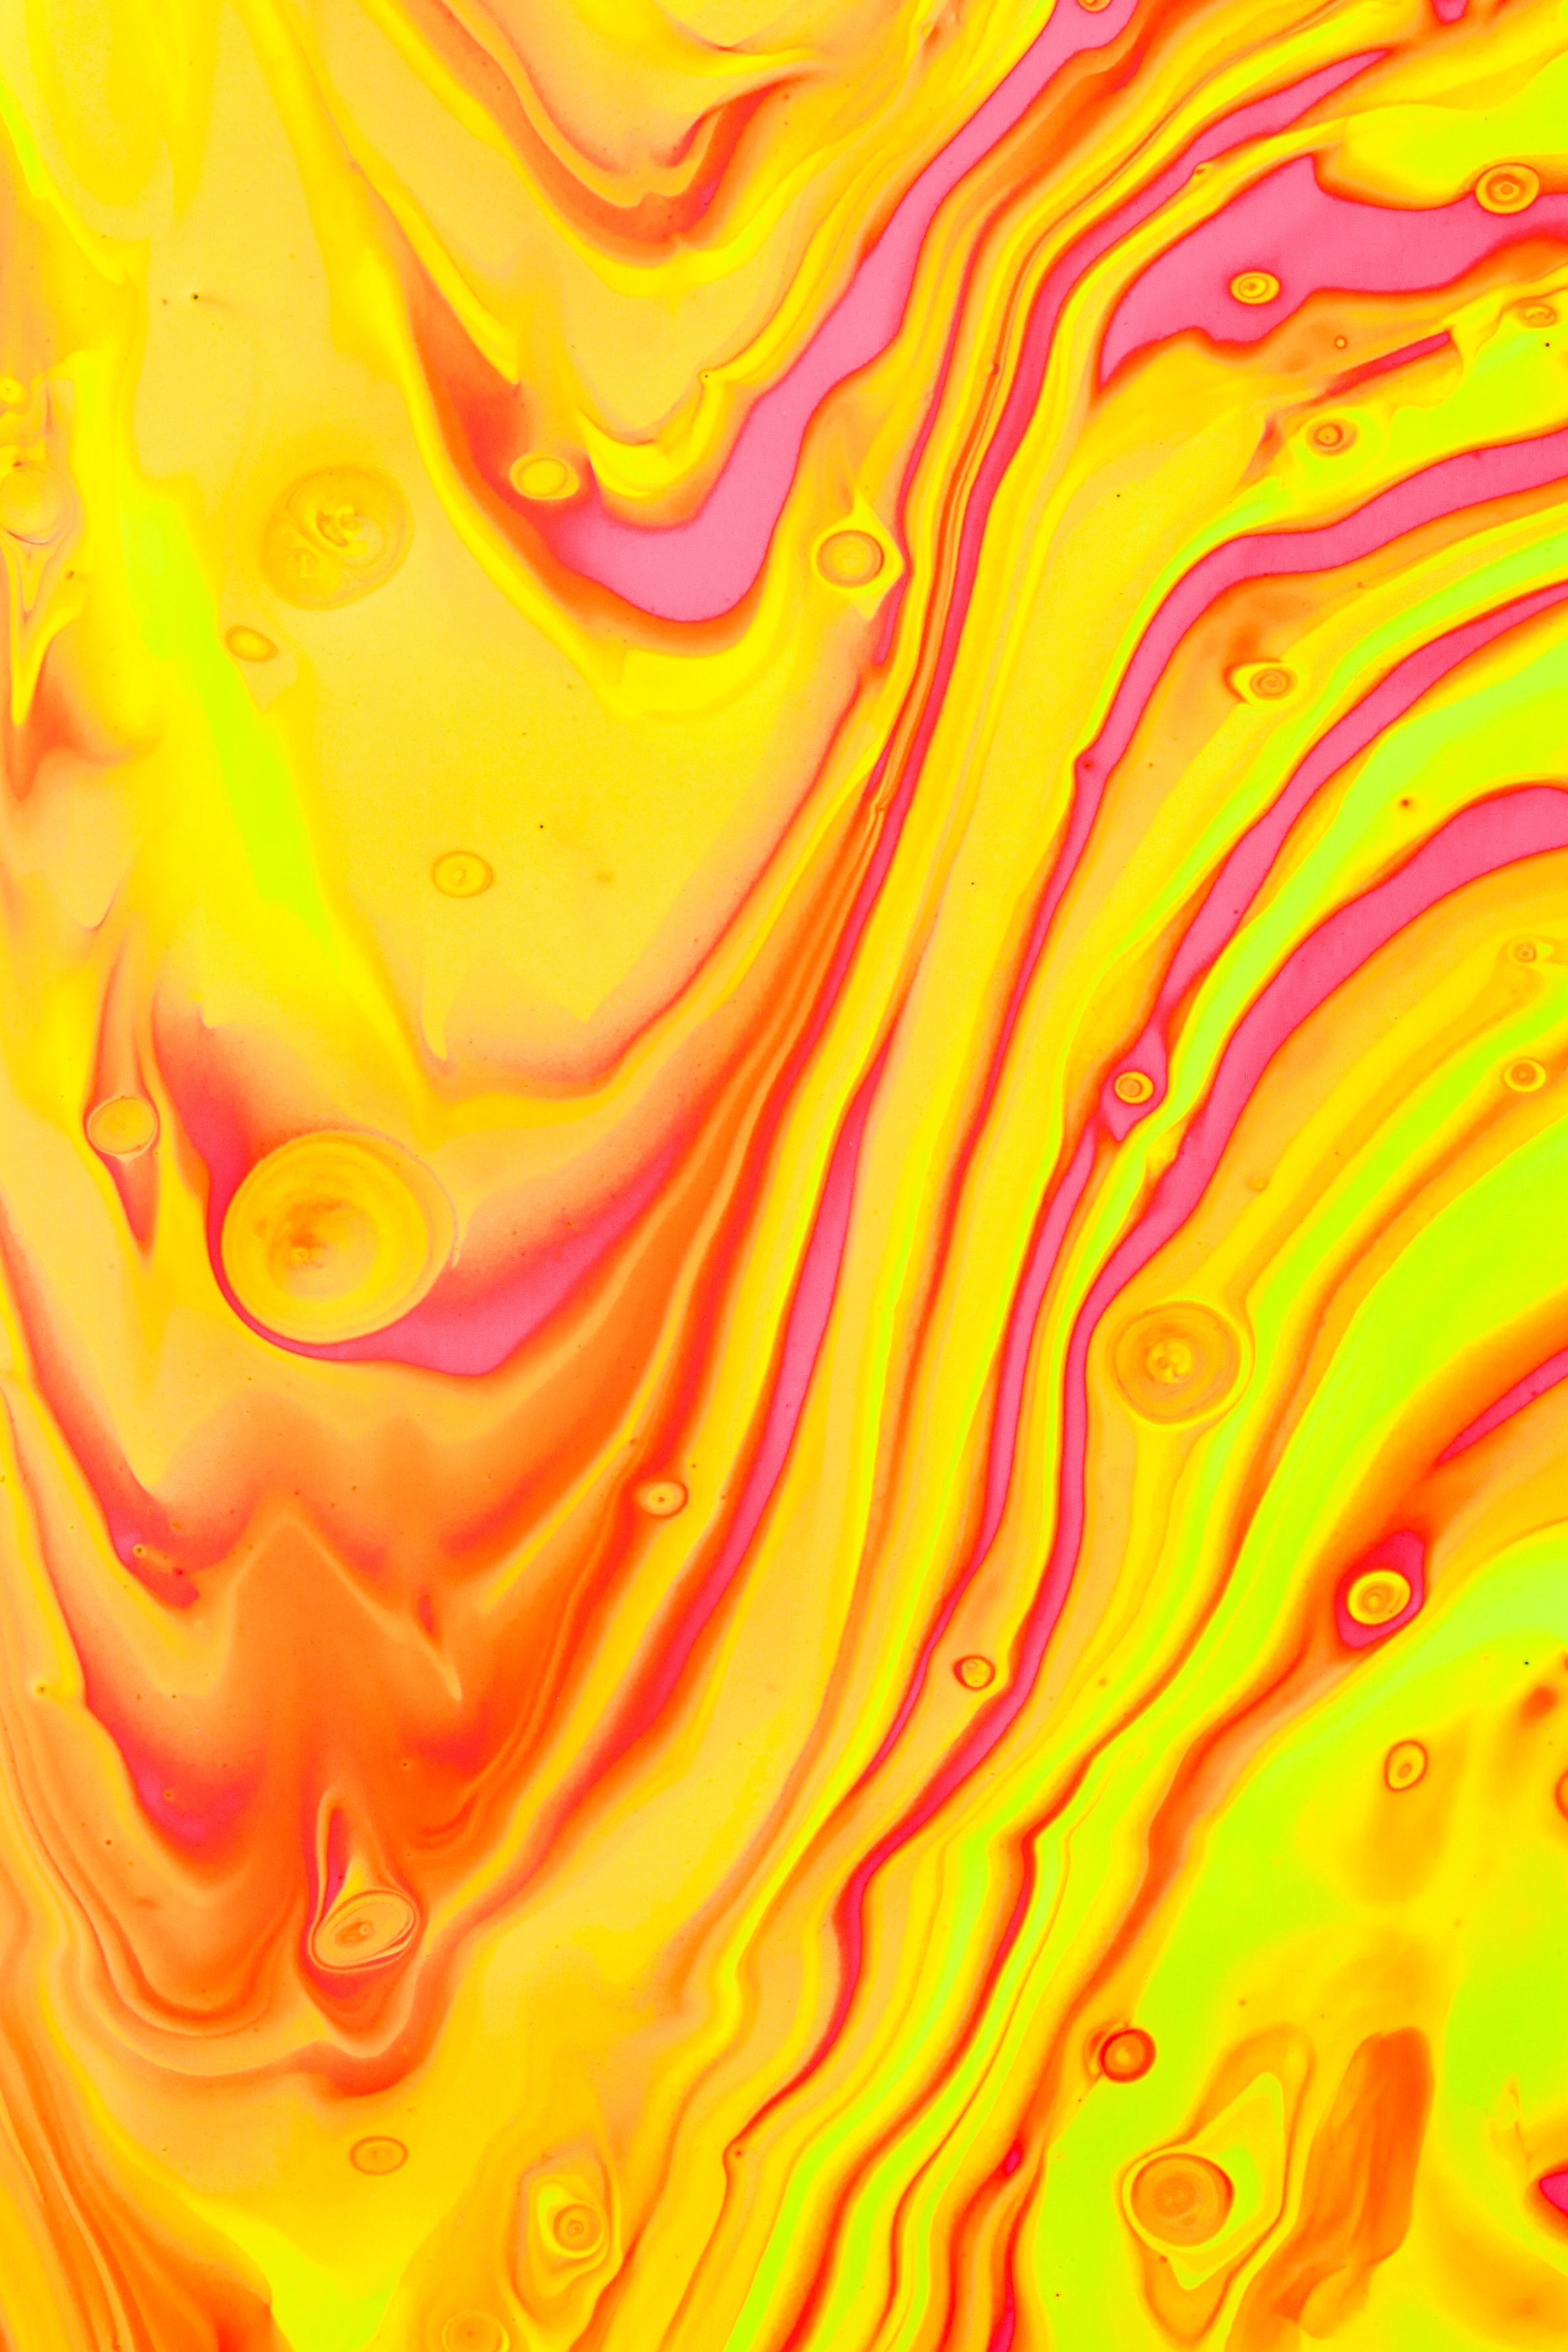 134260 free download Yellow wallpapers for phone, liquid, divorces, paint, abstract Yellow images and screensavers for mobile